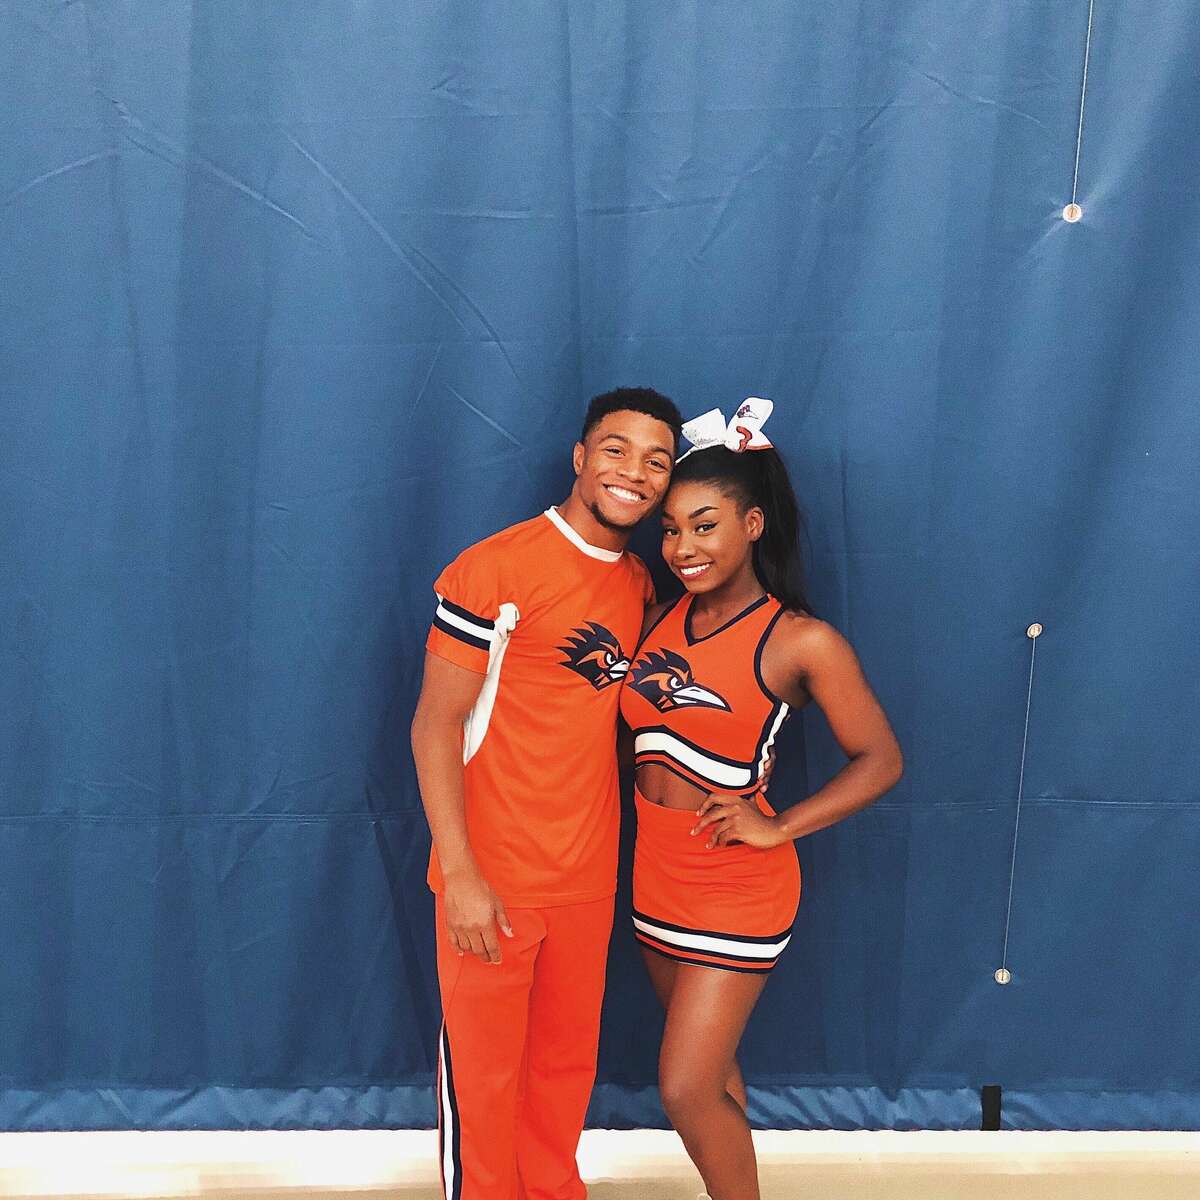 Tyriq Kuykendall, left, is seen in the photo with one of his teammates. Last Saturday, the University of Texas-San Antonio Cheerleader tumbled his way 100 yards in a video that has become viral.